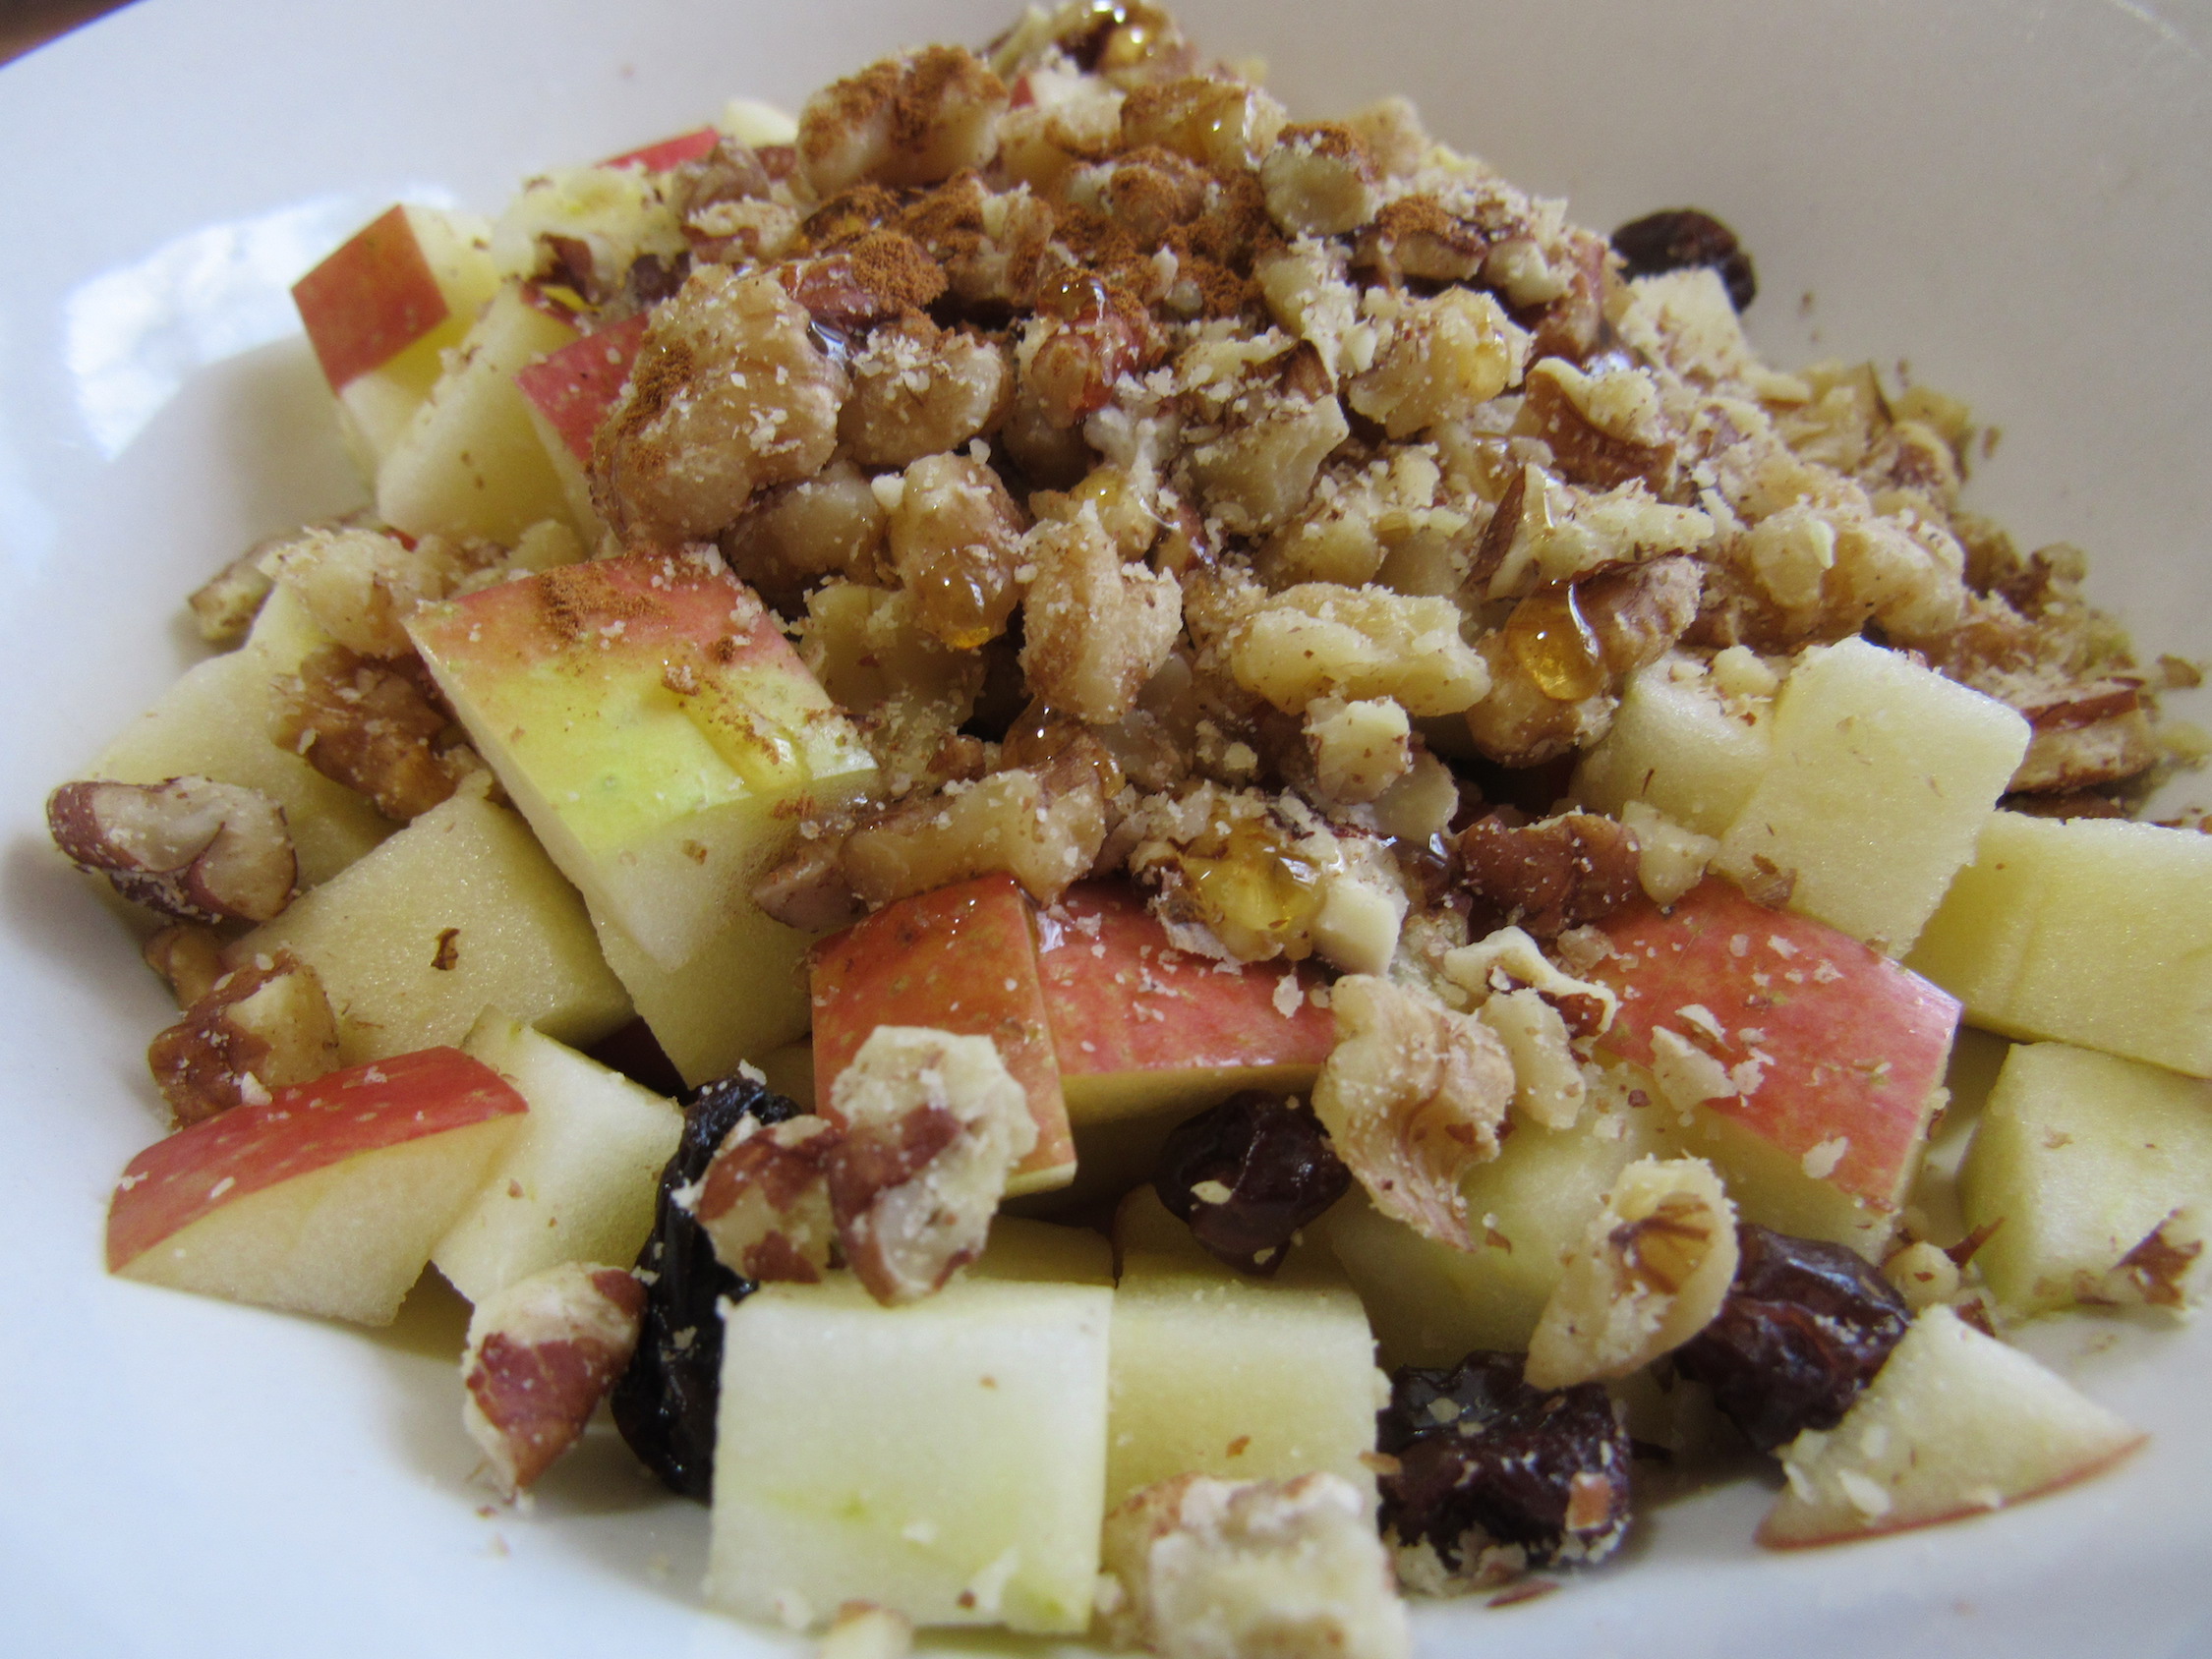 Balanced Bowl: Apple, Crushed Nuts, Raisins, and Nut Butter